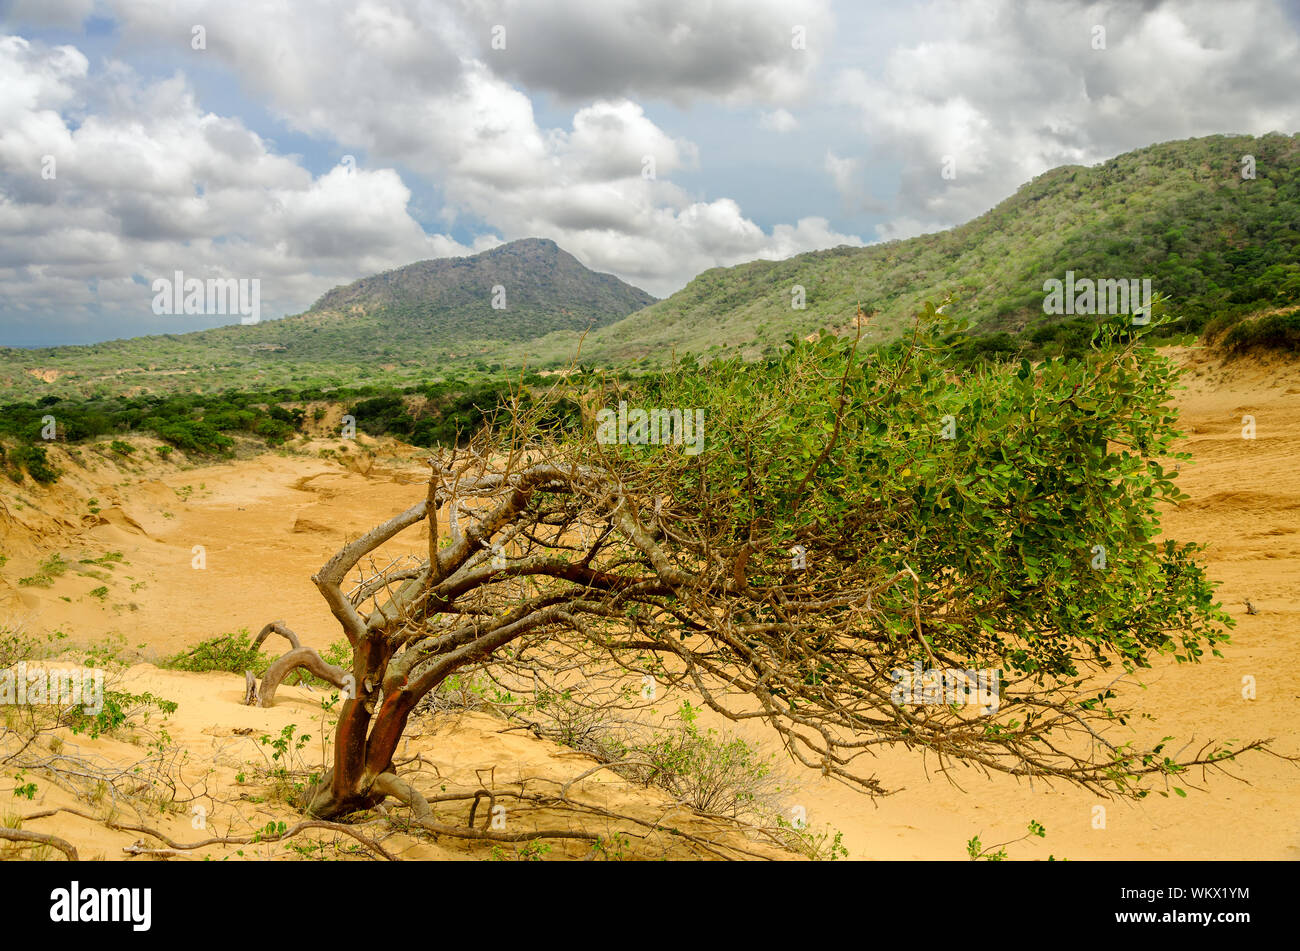 Bent Tree On Sand Against Cloudy Sky At Macuira National Park Stock Photo